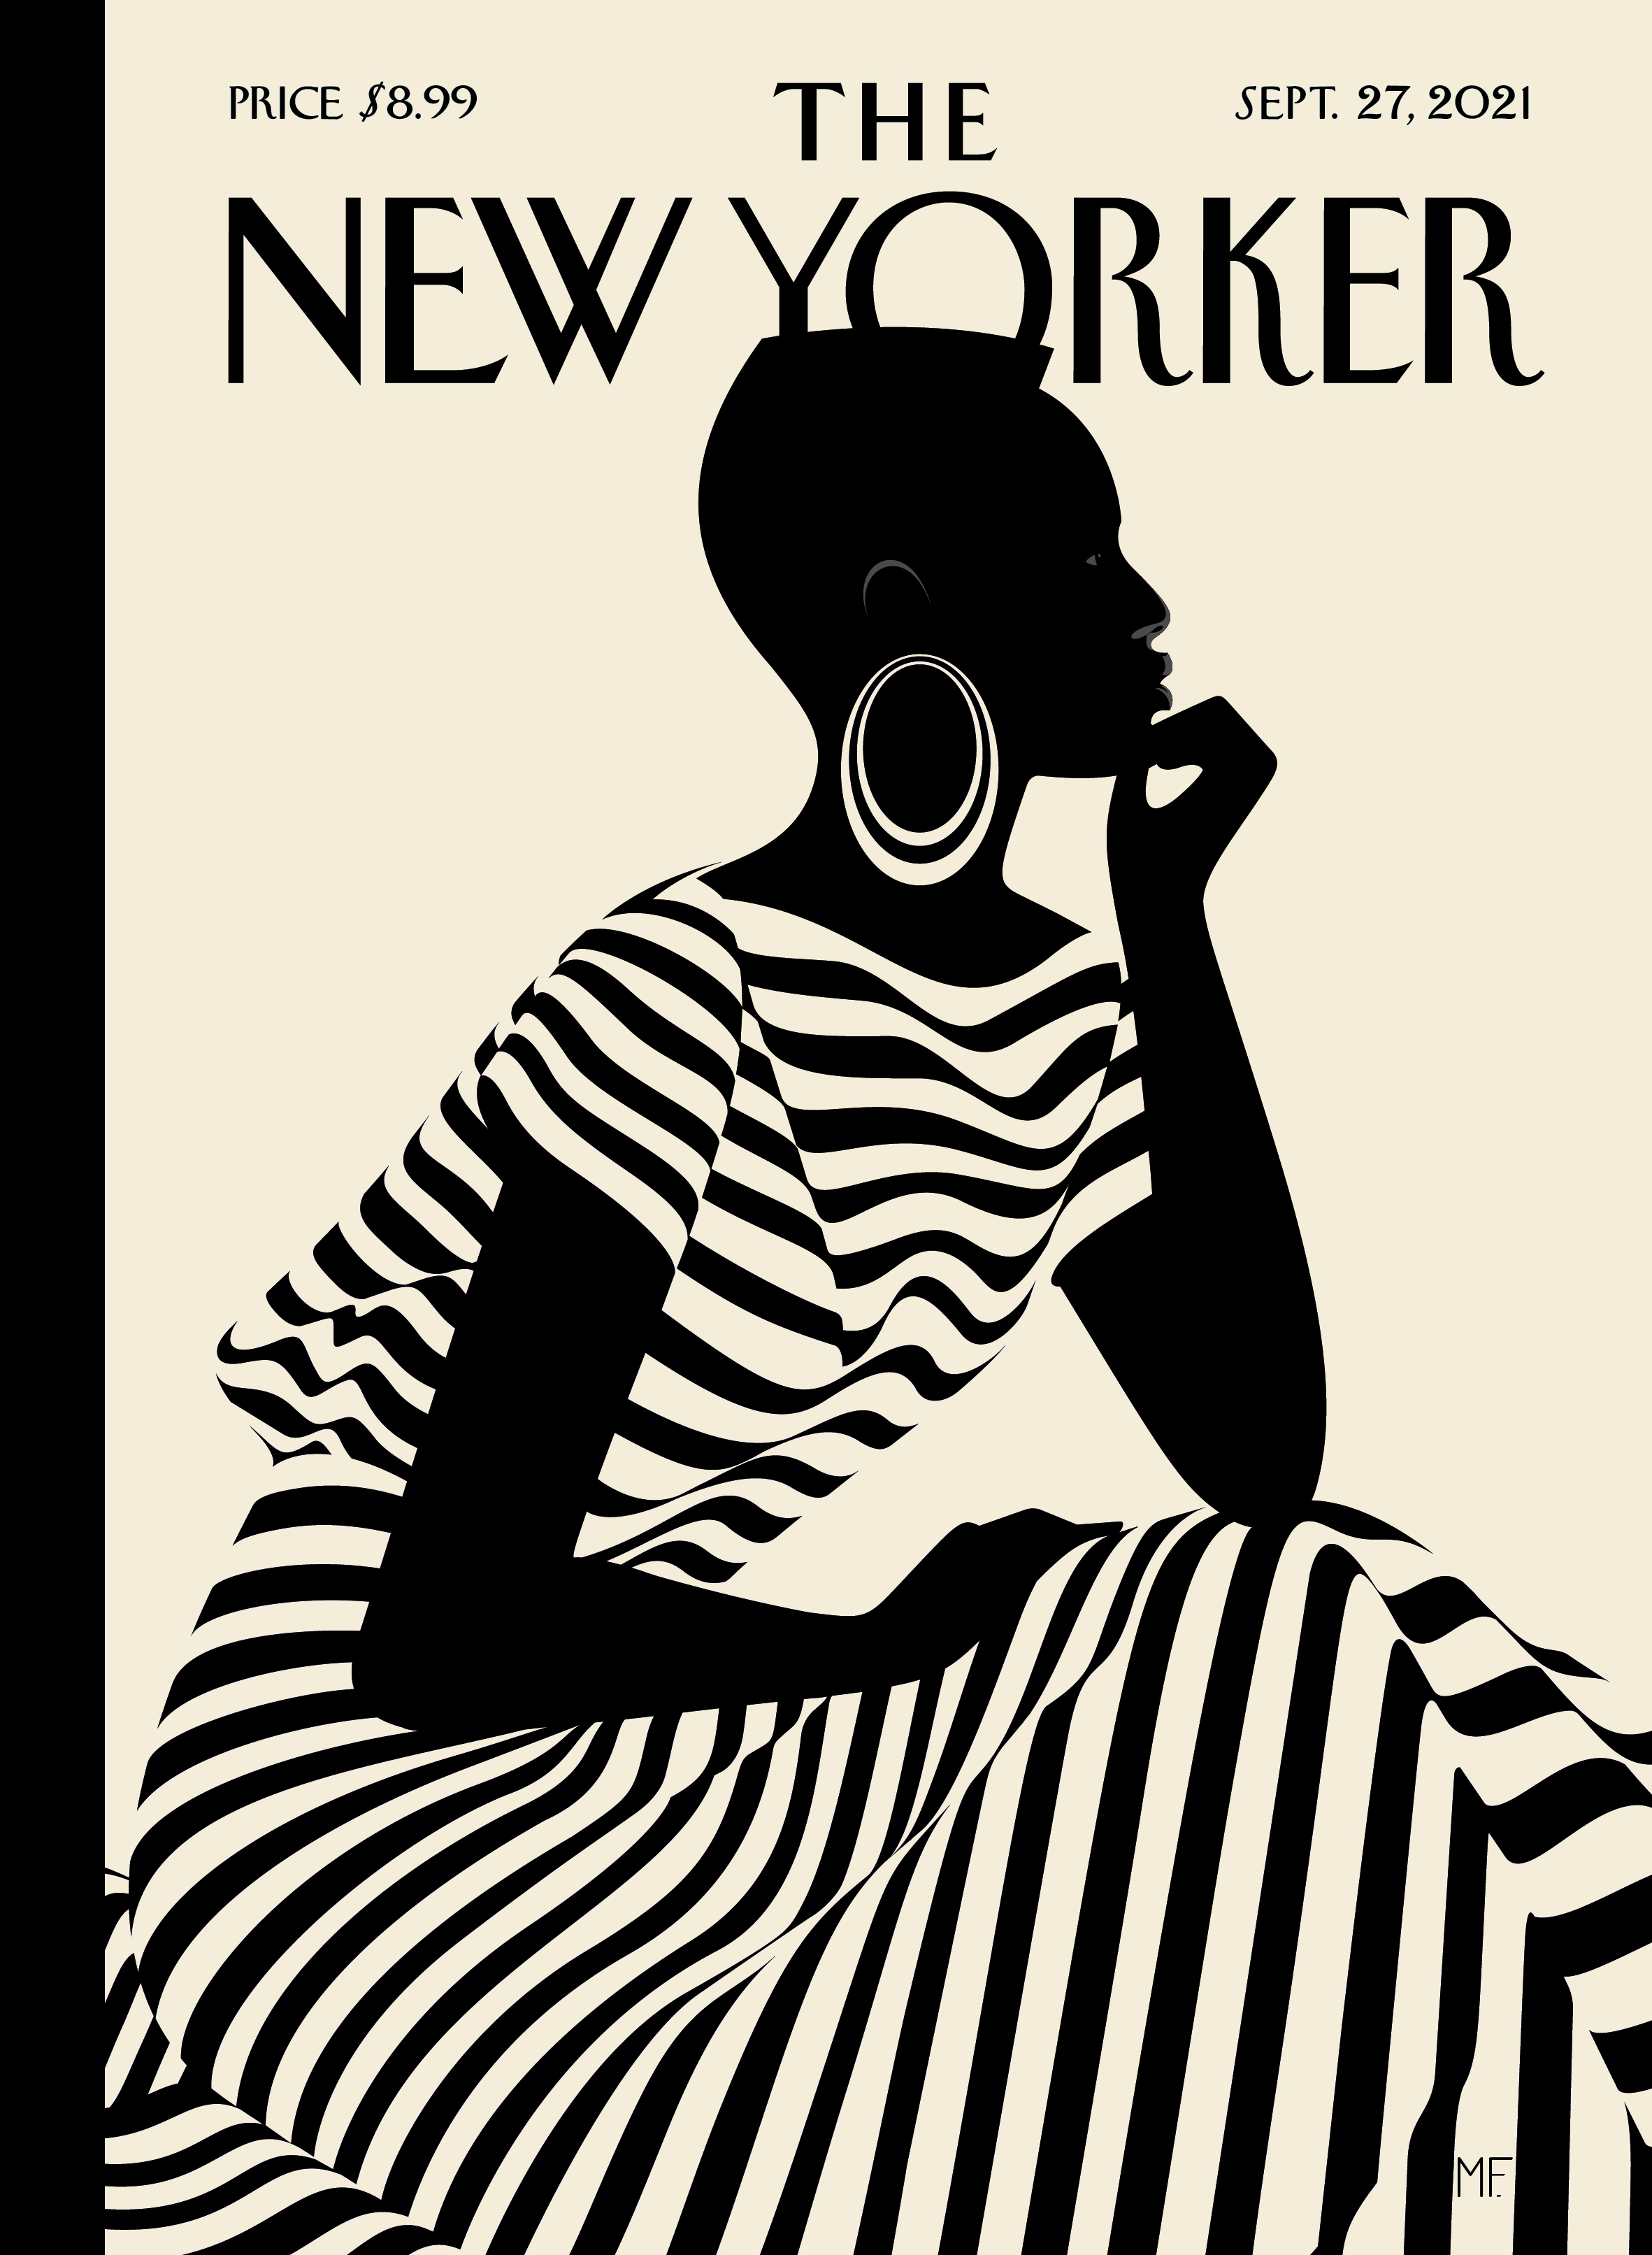 The New Yorker - "Composed," September 27, 2021